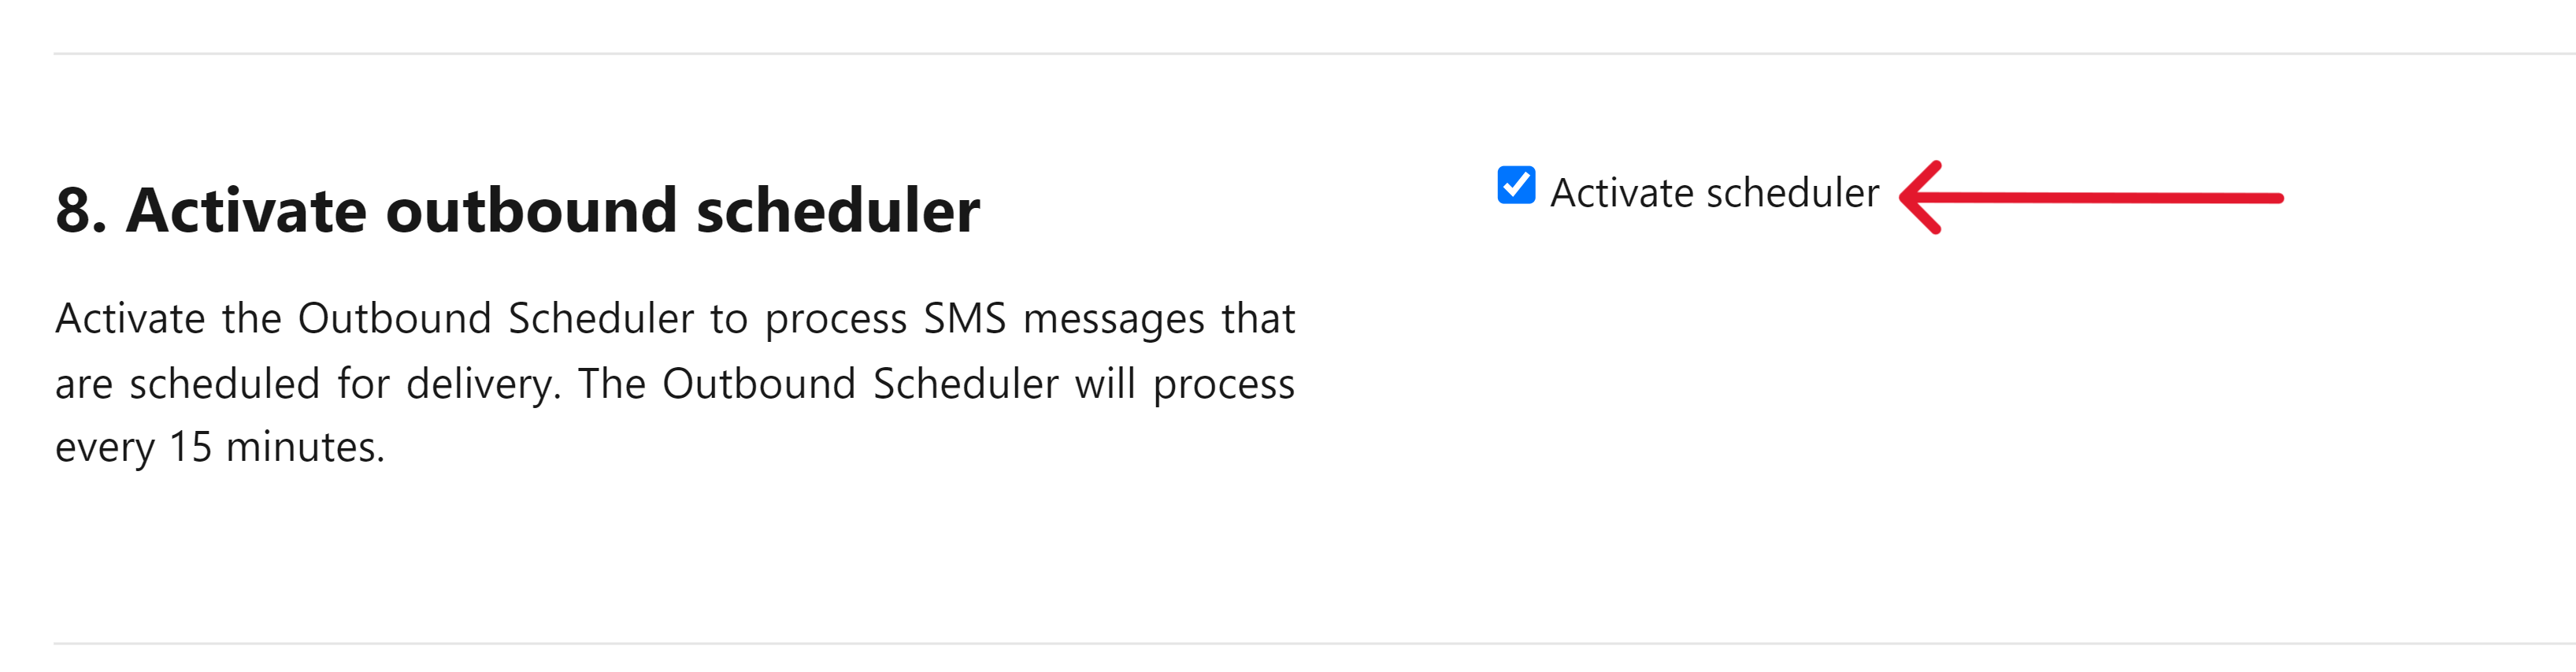 Mercury_SMS_-_Setup_Activate_outbound_scheduler_checked.png